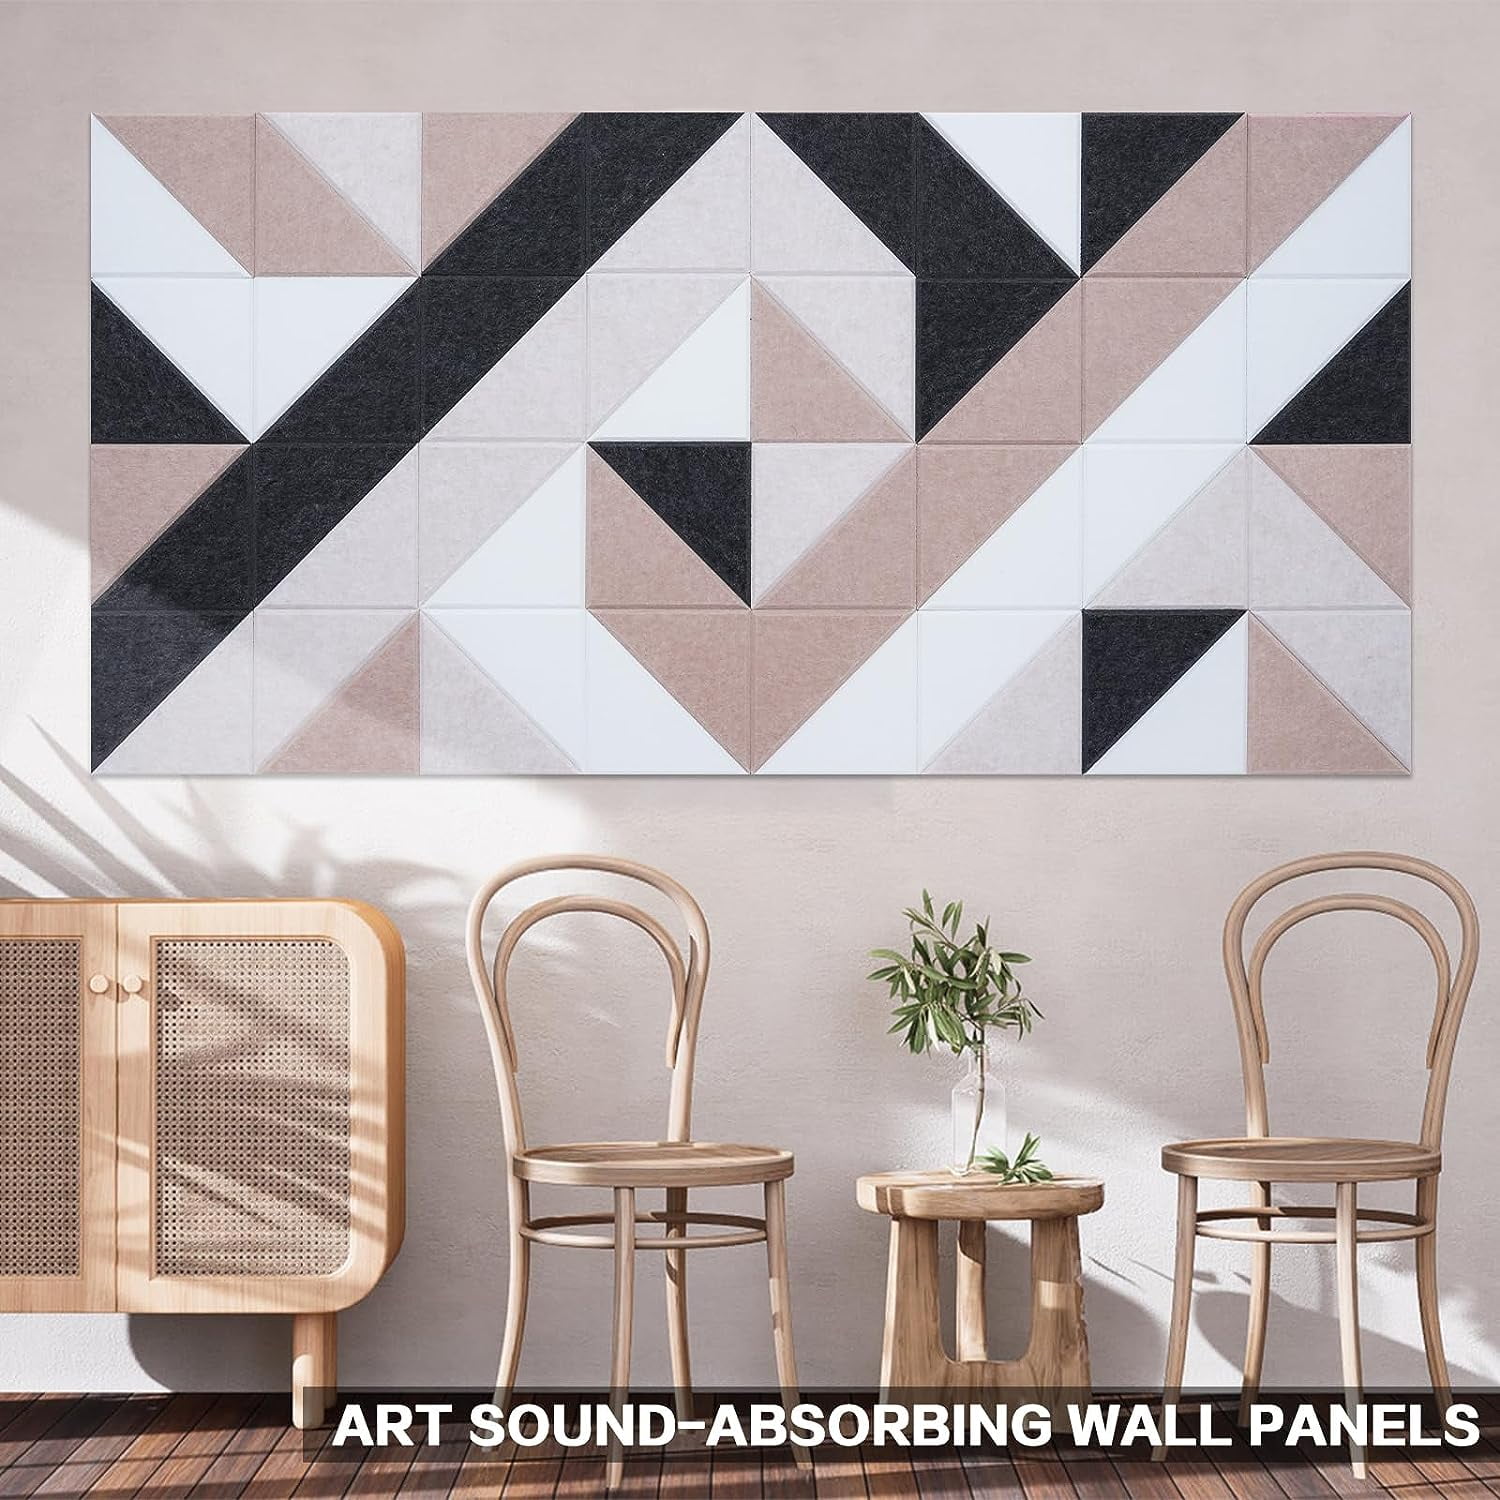 Caltero Acoustic Wall Panels,Sound Proof Panels Self Adhesive, Triangular Sound  Absorbing Panels,Wall Decorative Art Soundproof Wall Panels for Studios and  Home,Camel Color,63 x 31.5 in 